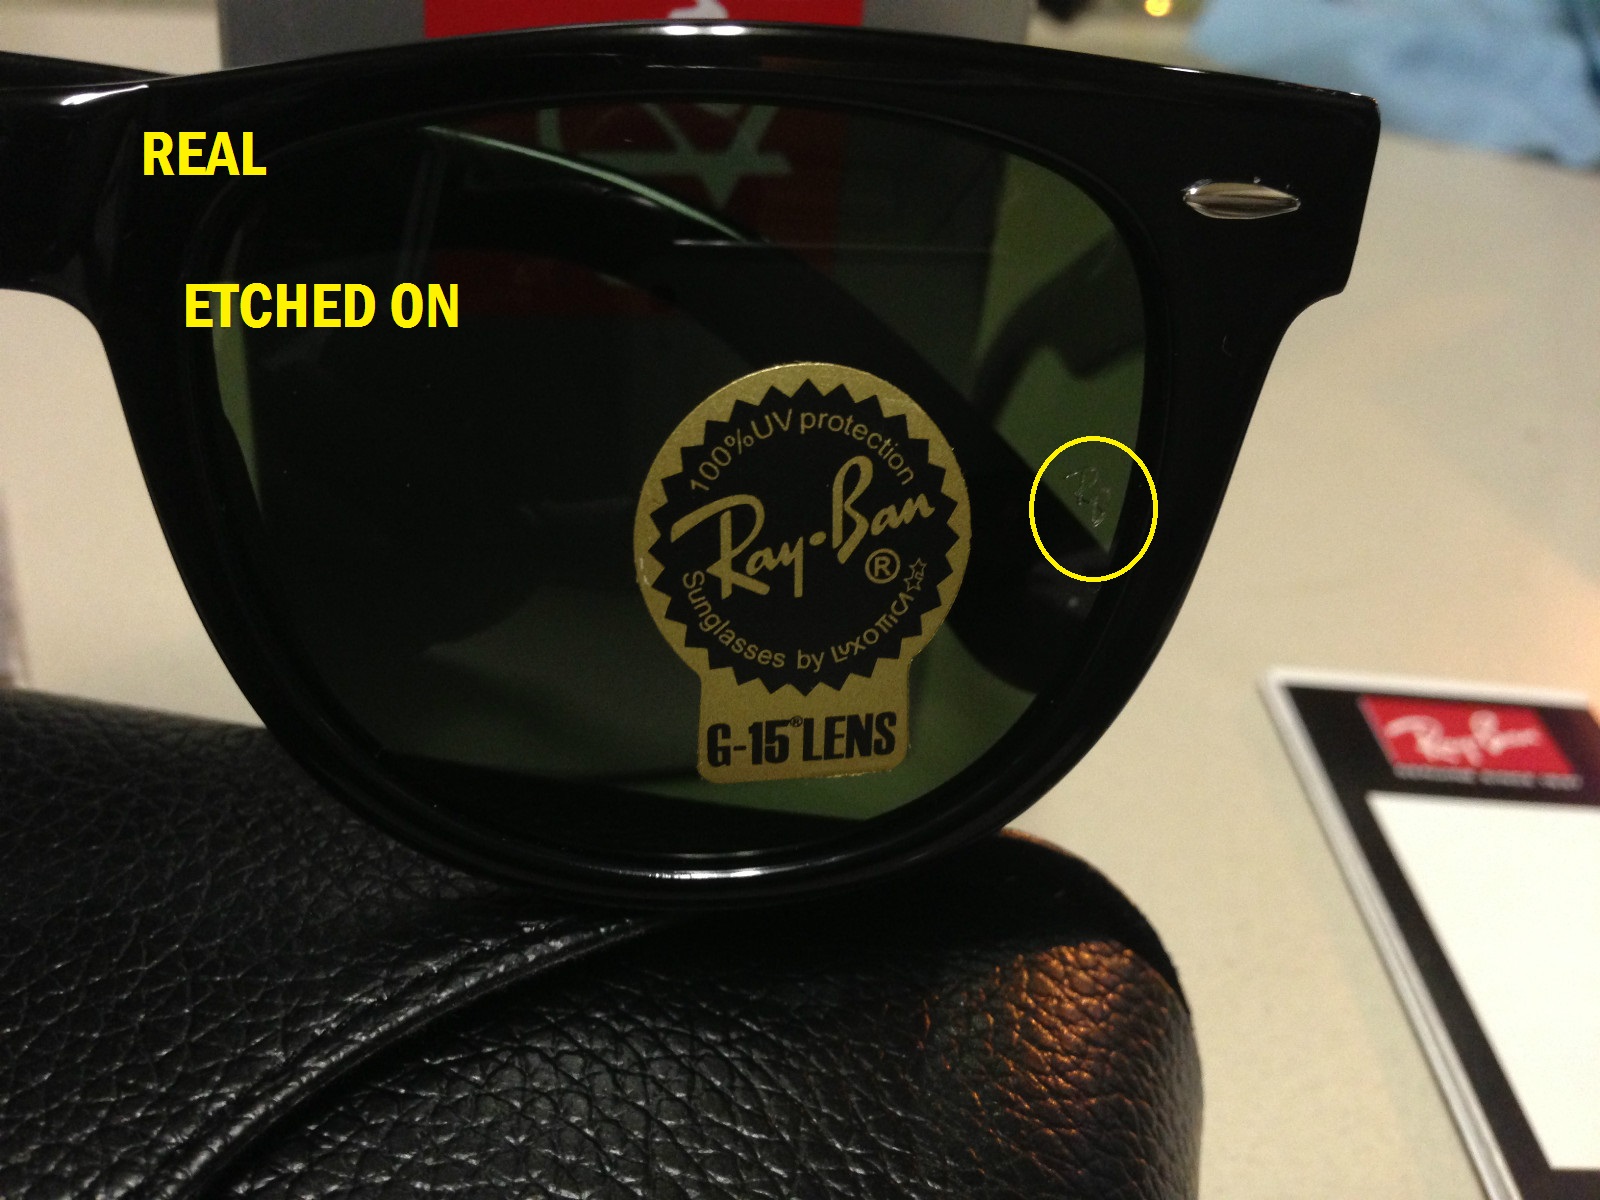 often deal with Martyr fake ray ban sunglasses - The eBay Community